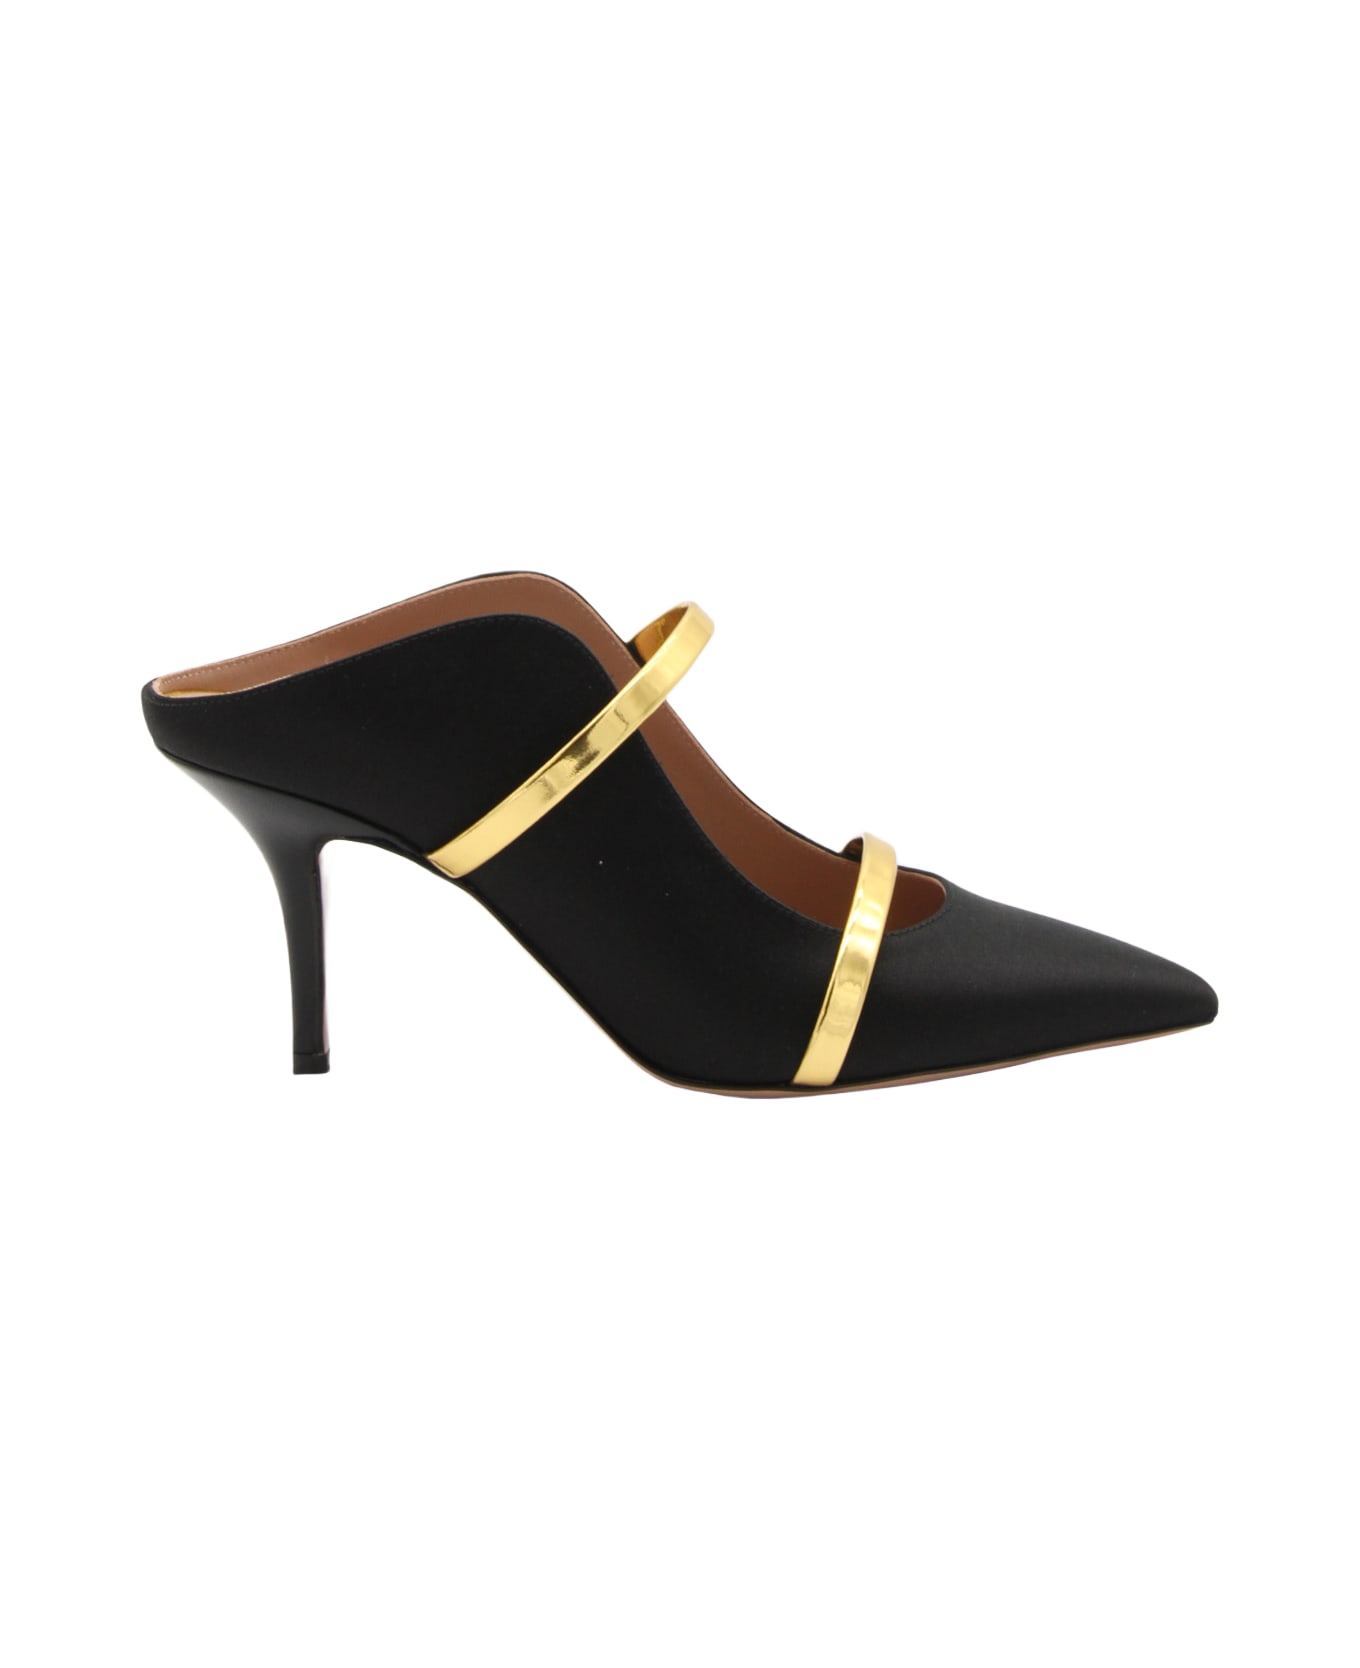 Malone Souliers Black And Gold Leather Maureen Pumps - Black サンダル